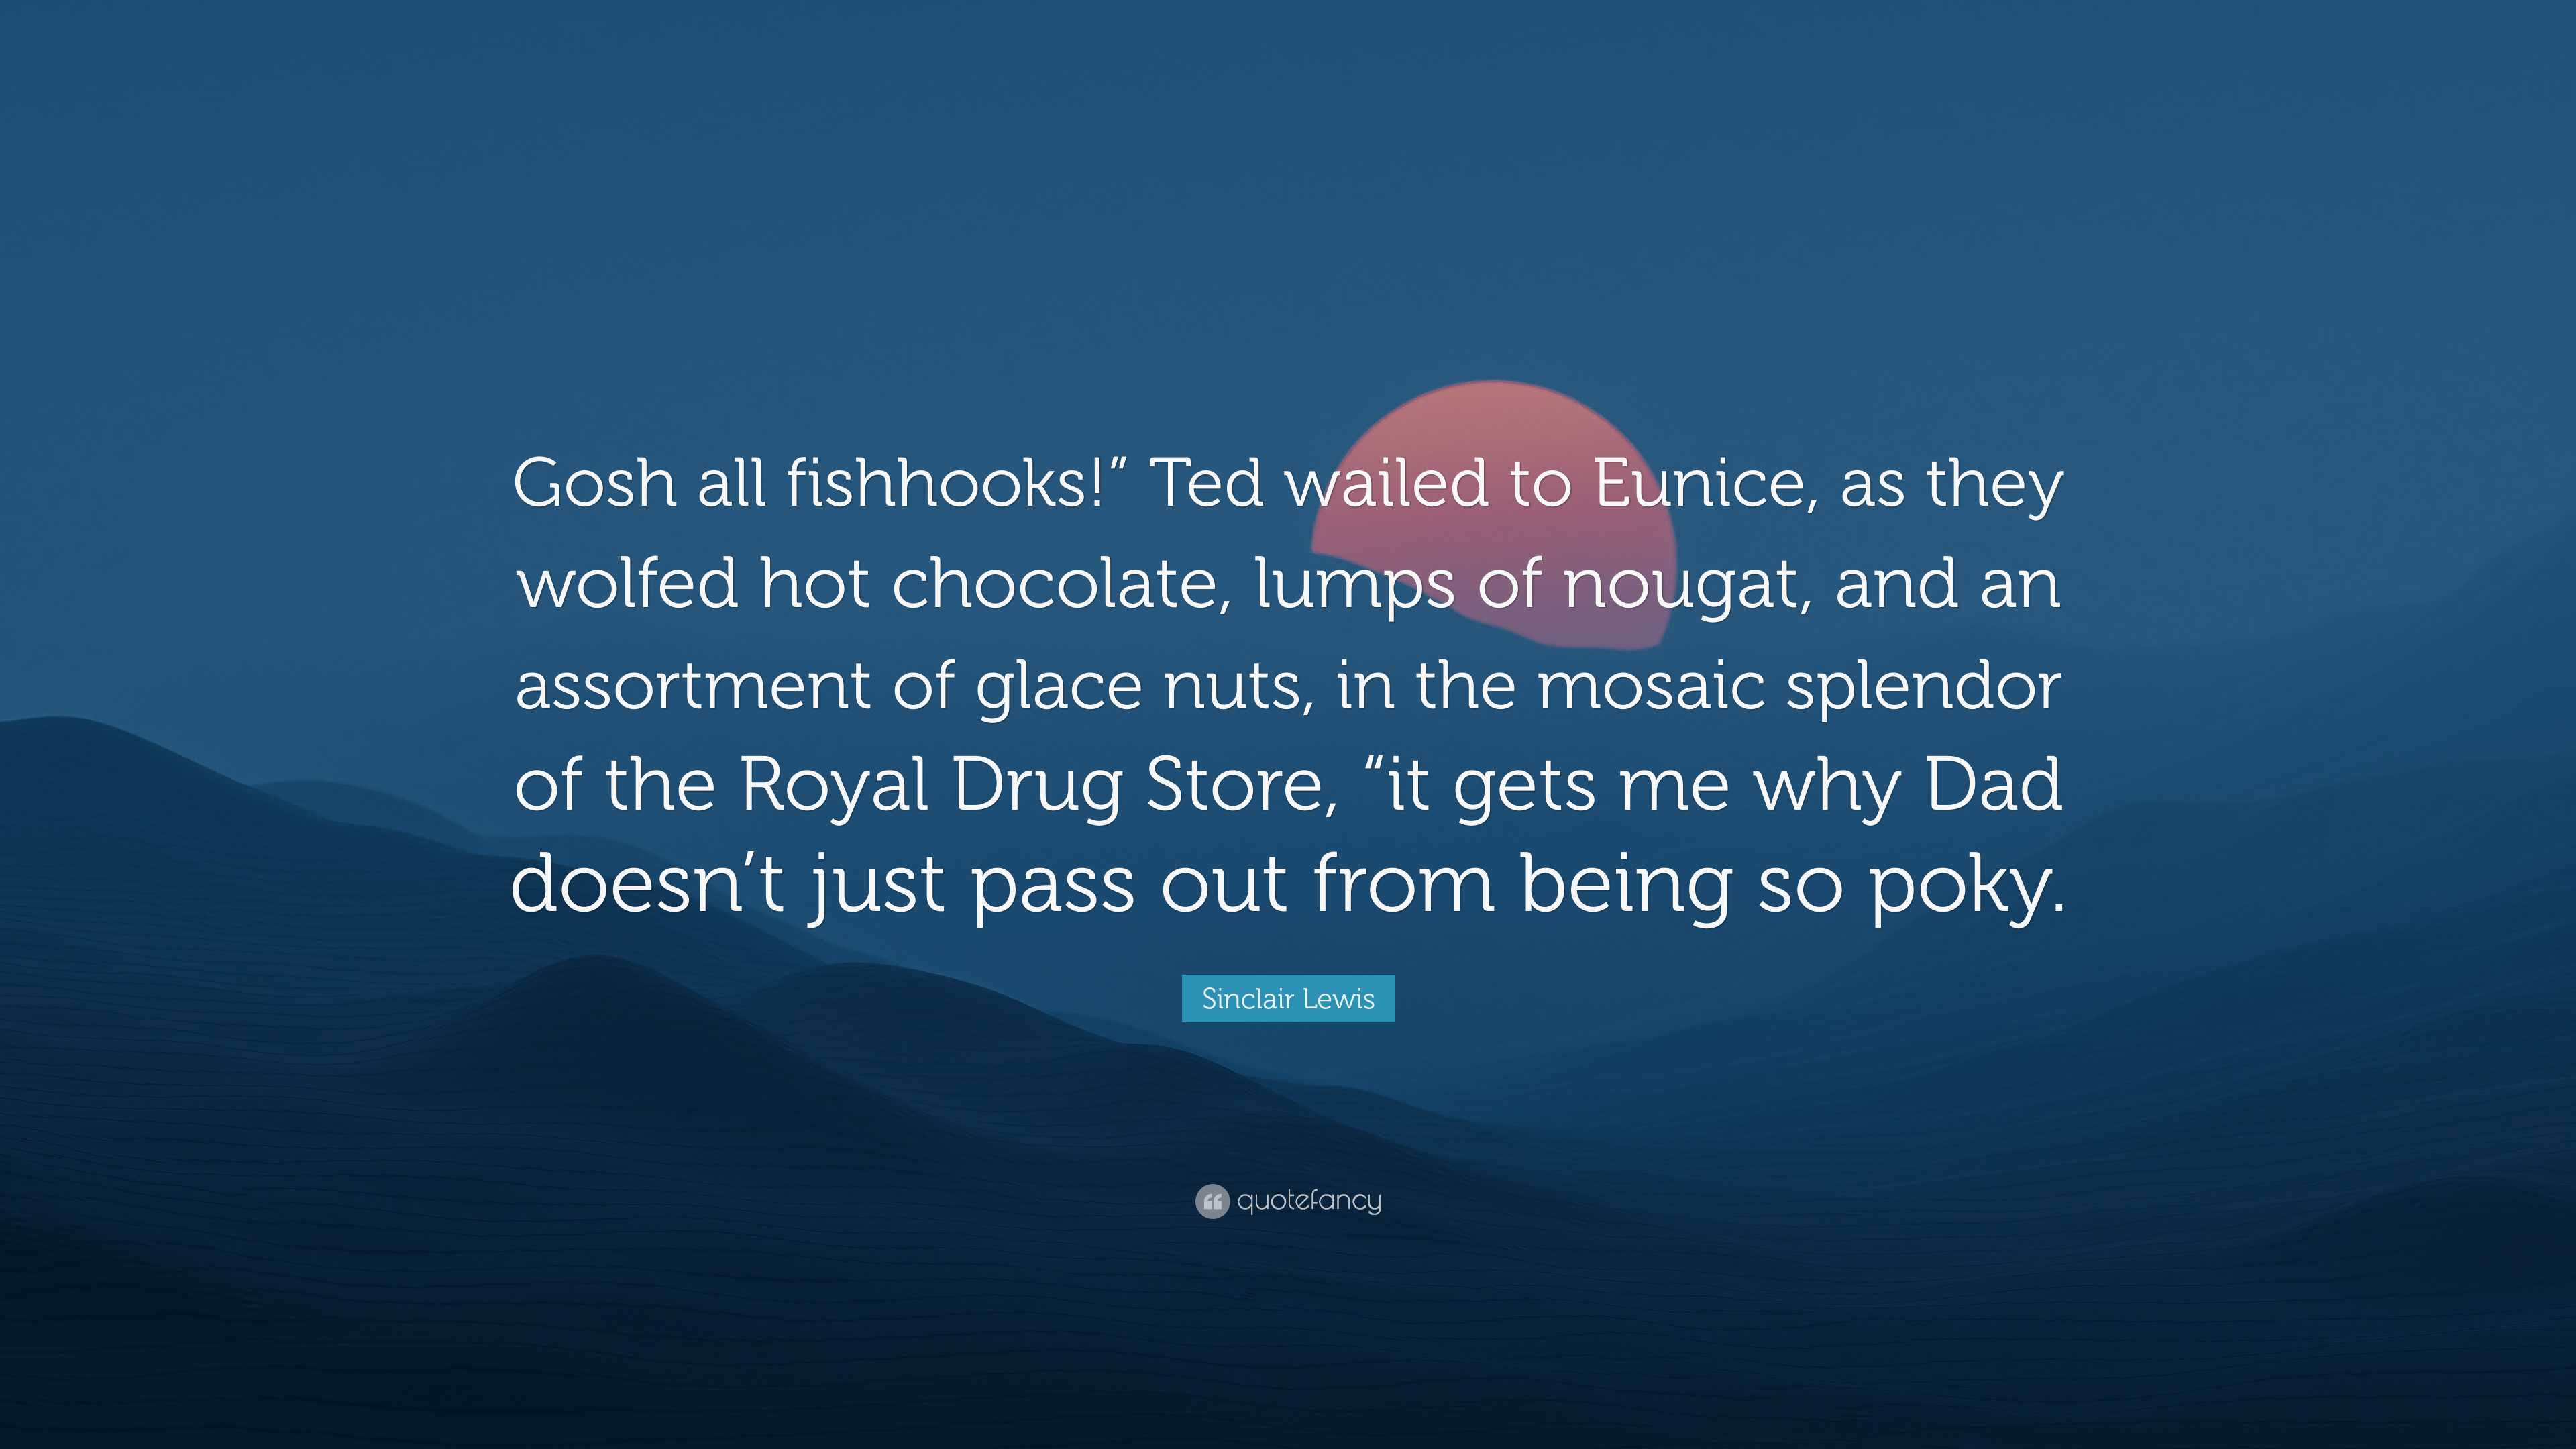 https://quotefancy.com/media/wallpaper/3840x2160/8075632-Sinclair-Lewis-Quote-Gosh-all-fishhooks-Ted-wailed-to-Eunice-as-they-wolfed-hot.jpg